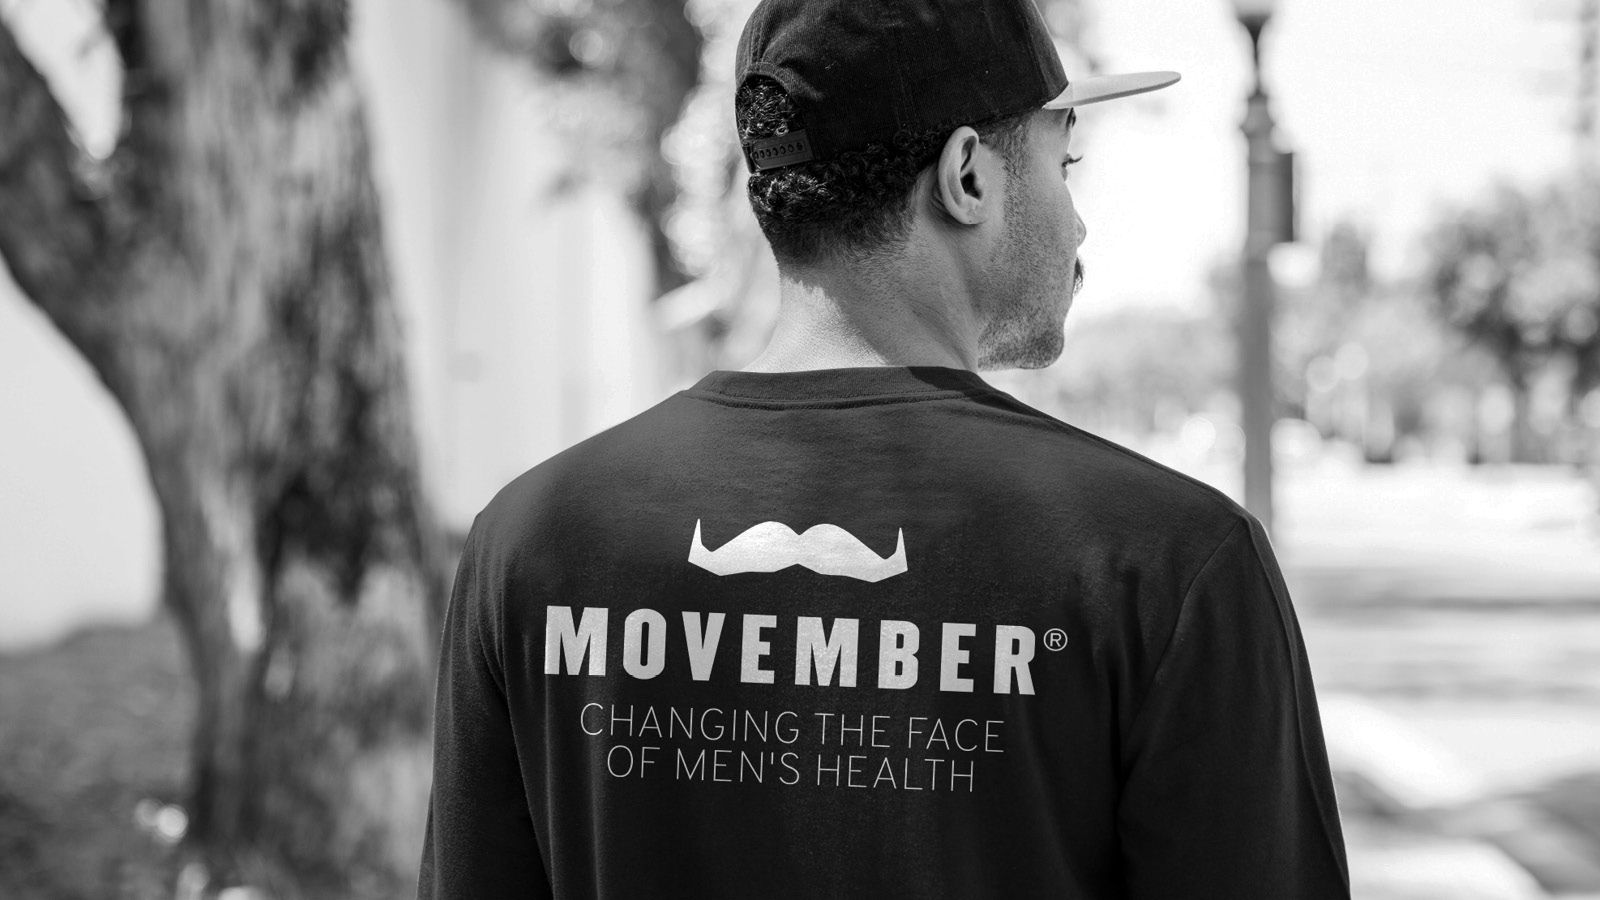 Black and white photo showing the back of a man wearing a stylish Movember-branded shirt.